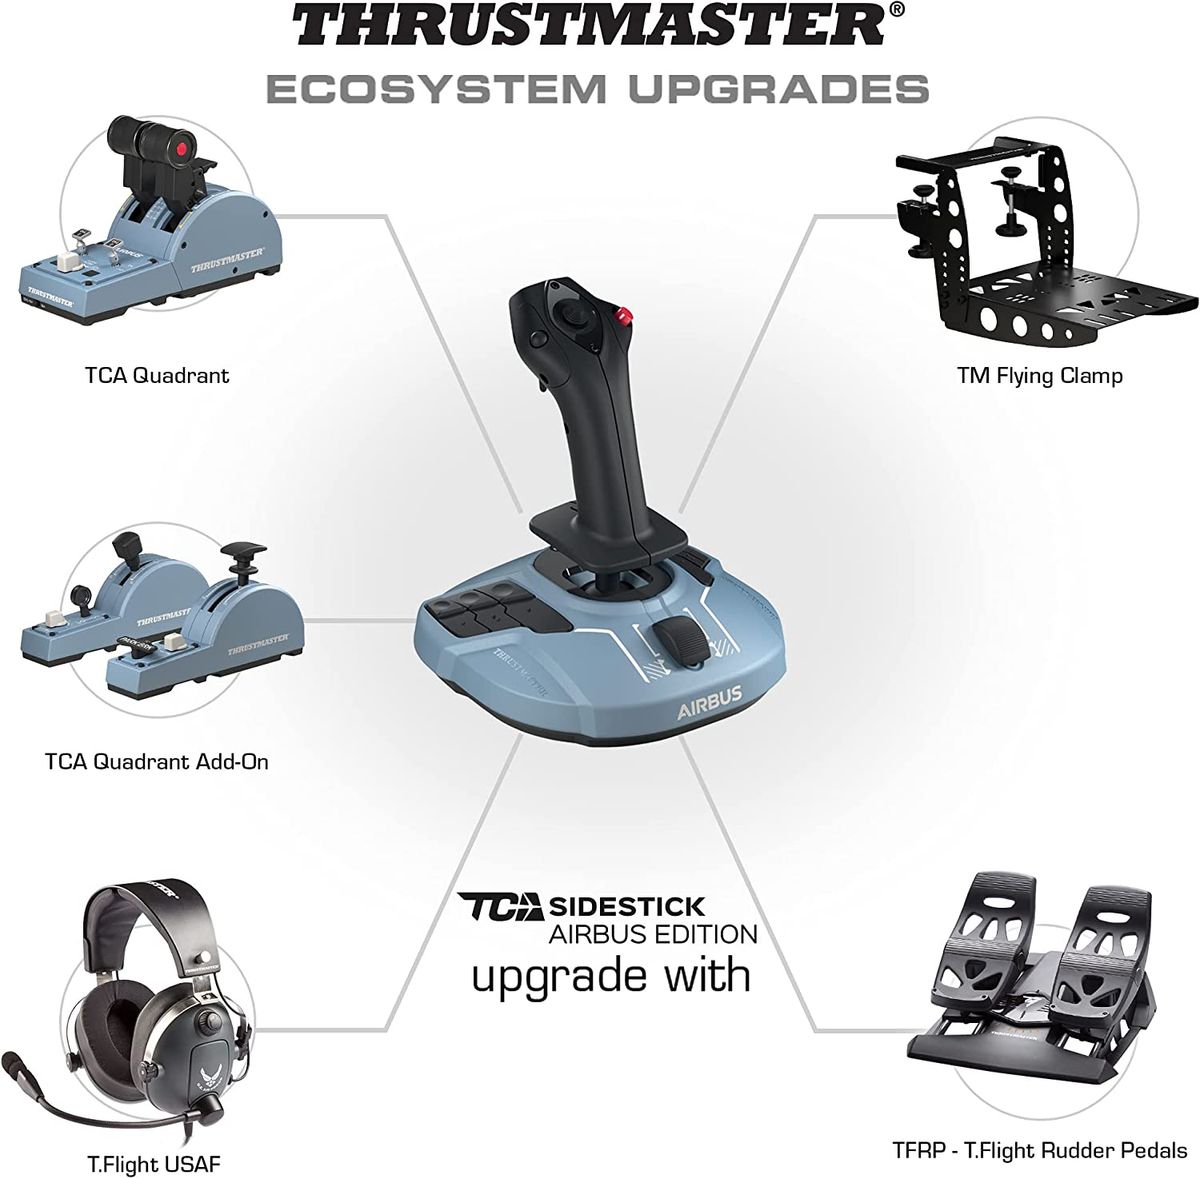 Function, Compatible Airliner of Edition, Technology PC Airbus Joystick, Built-in Joystick Thrustmaster Ambidextrous, Magnetic Airbus and TCA Ergonomic Side Side